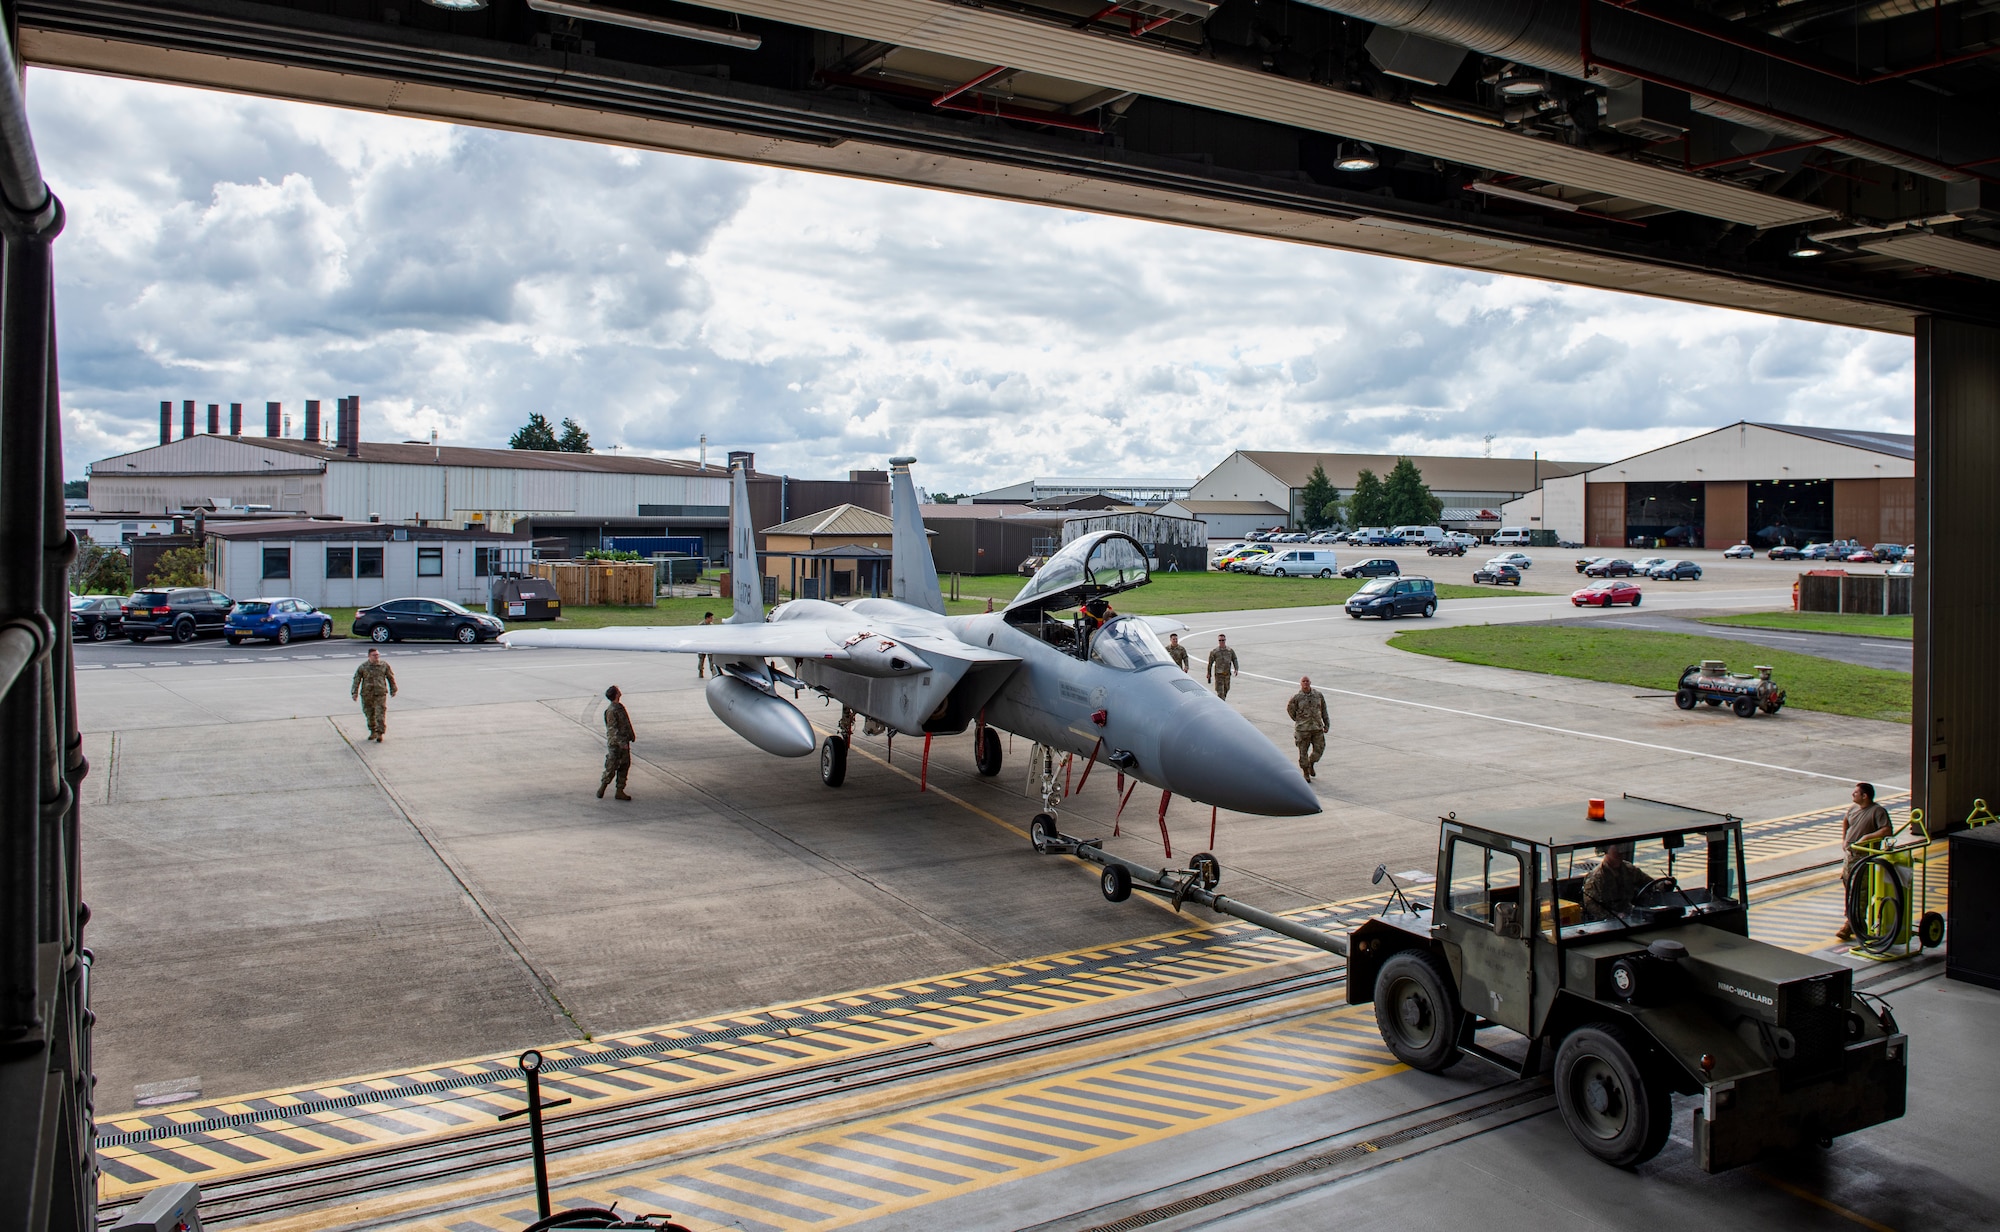 U.S. Air Force Airmen, assigned to the 48th Component Maintenance Squadron fuels systems maintenance shop, tow an F-15C Eagle into the hangar during an Agile Combat Employment training at Royal Air Force Lakenheath, England, Aug. 31, 2020. Proficiency in a multitude of skills allows Airmen to more effectively and efficiently respond to unique scenarios and potential threats, which is a key aspect of the ACE initiative. (U.S. Air Force photo by Airman 1st Class Jessi Monte)